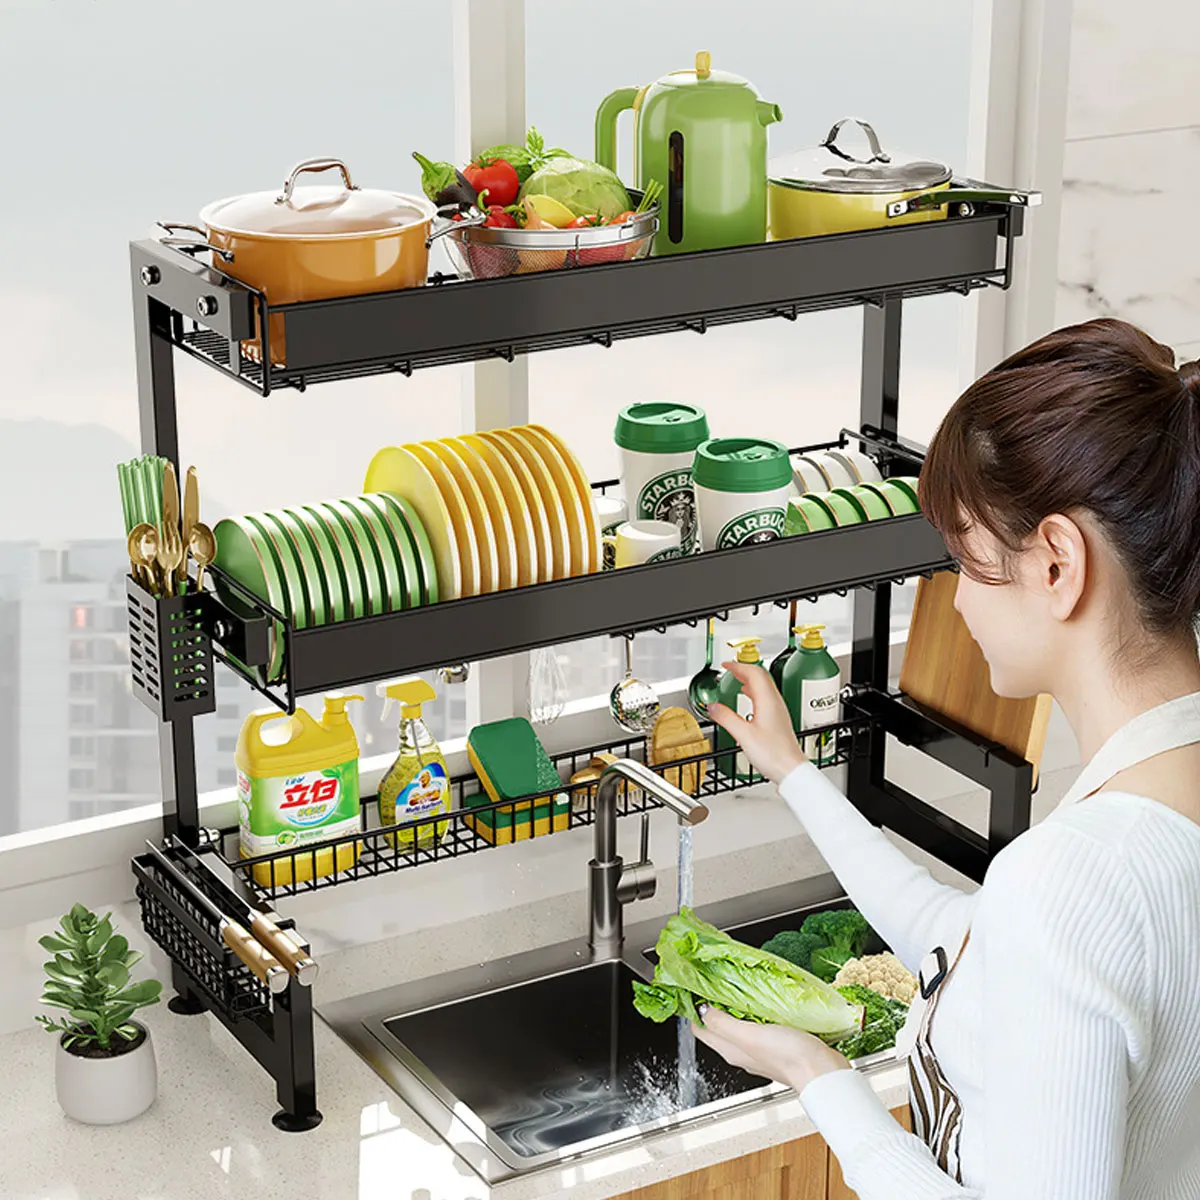 https://ae01.alicdn.com/kf/Sd7e301013a8c44c48b59266f238043c8i/Over-The-Sink-Dish-Drying-Rack-Large-Dish-Drainer-with-Cutting-Board-Holder-Hooks-for-Kitchen.jpg